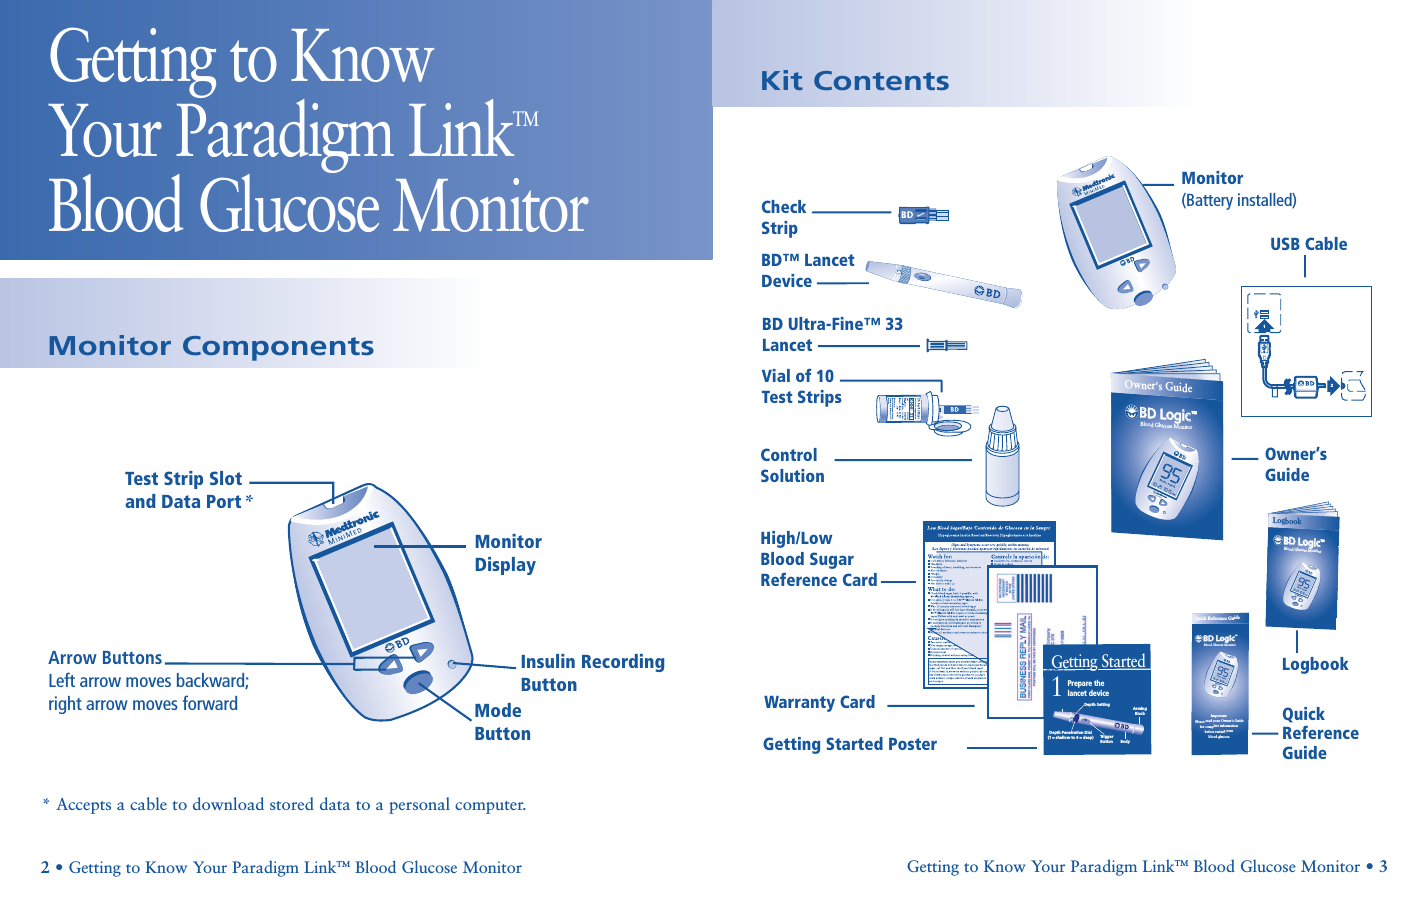 Kit ContentsGetting to Know Your Paradigm LinkTMBlood Glucose MonitorGetting to Know Your Paradigm LinkTM Blood Glucose Monitor • 32• Getting to Know Your Paradigm LinkTM Blood Glucose Monitor Monitor ComponentsMonitor DisplayMode ButtonTest Strip Slot  and Data Port *Insulin Recording ButtonArrow ButtonsLeft arrow moves backward;right arrow moves forward* Accepts a cable to download stored data to a personal computer.Quick Reference  GuideCheckStripBD™ LancetDeviceMonitor(Battery installed)Owner’sGuideLogbookBD Ultra-Fine™ 33LancetControlSolutionWarranty CardVial of 10Test StripsHigh/Low  Blood Sugar  Reference CardGetting Started PosterBD LogicBD LogicBlood Glucose MonitorOwner&apos;s Guide™Quick Reference GuideBD LogicBD LogicBlood Glucose MonitorImportant: Please read your Owner’s Guide for complete information before testing your blood glucose.™1Getting StartedPrepare thelancet deviceArming KnobDepth SettingBodyTri gg er  ButtonDepth Penetration Dial (1 = shallow to 6 = deep)BD LogicBD LogicBlood Glucose MonitorLogbook™21USB Cable